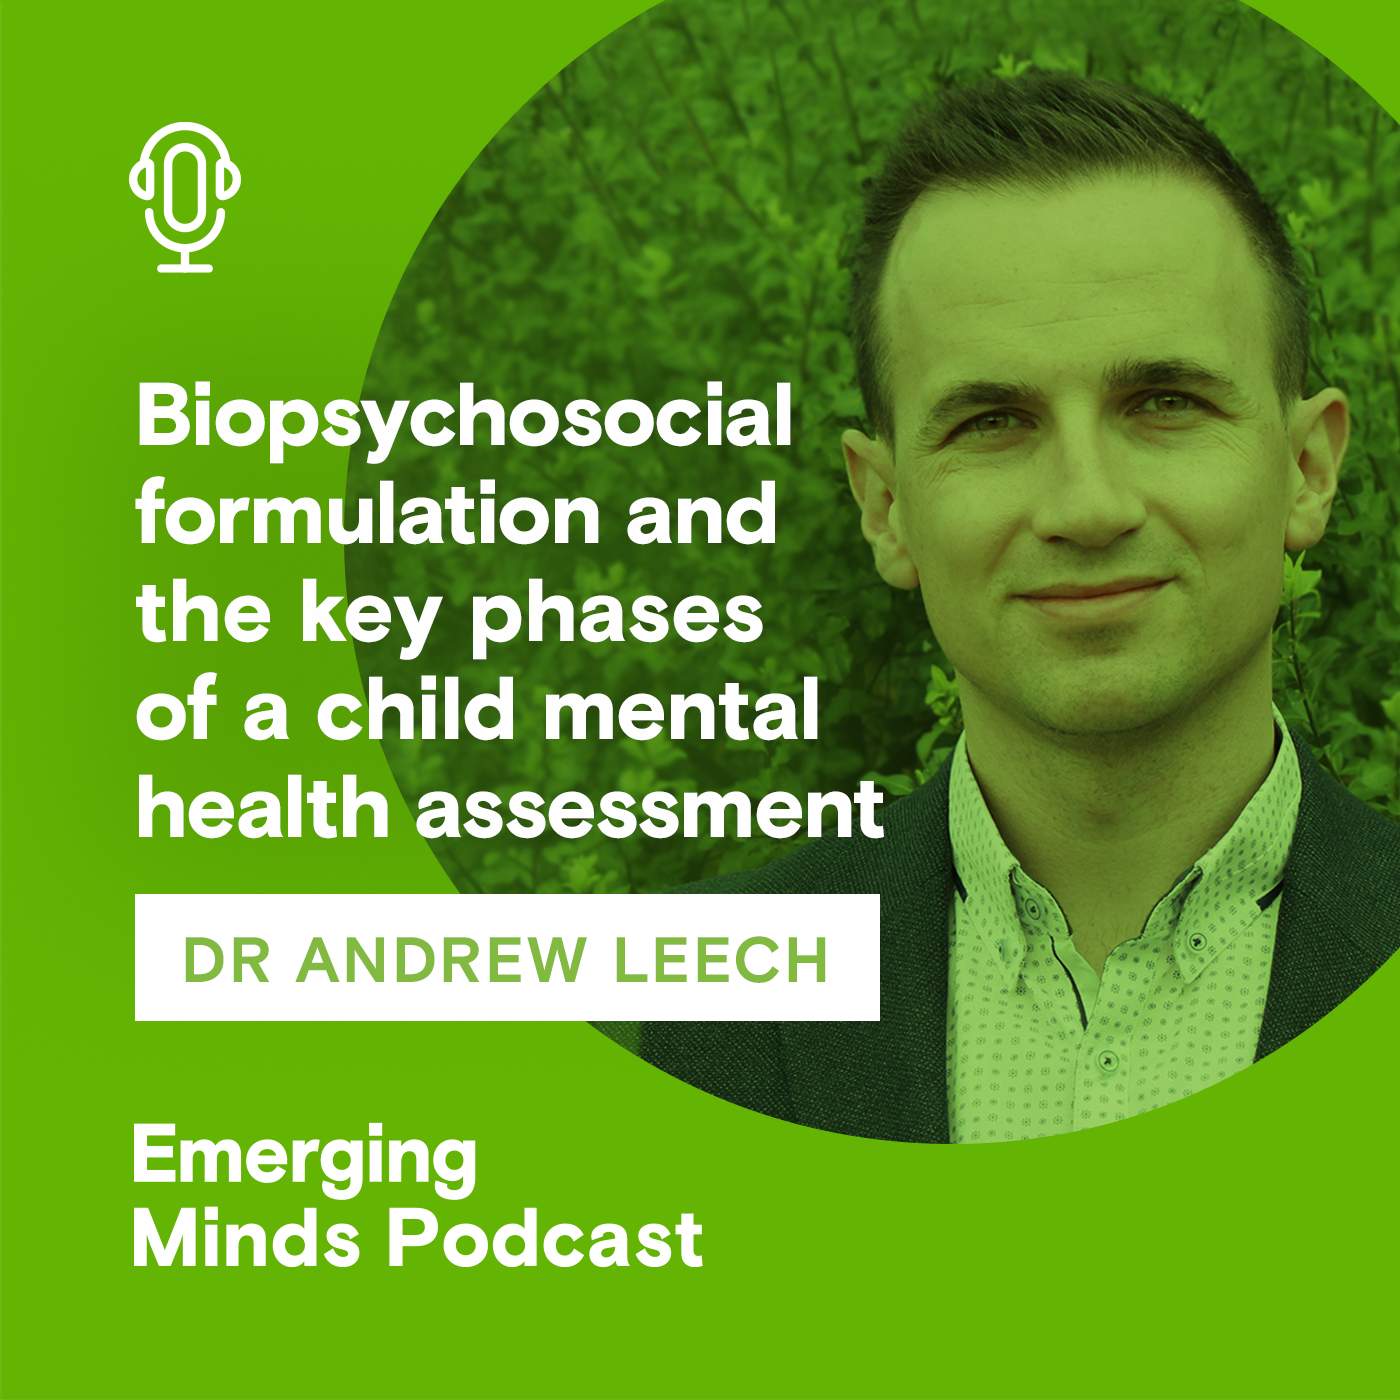 Biopsychosocial formulation and the key phases of a child mental health assessment